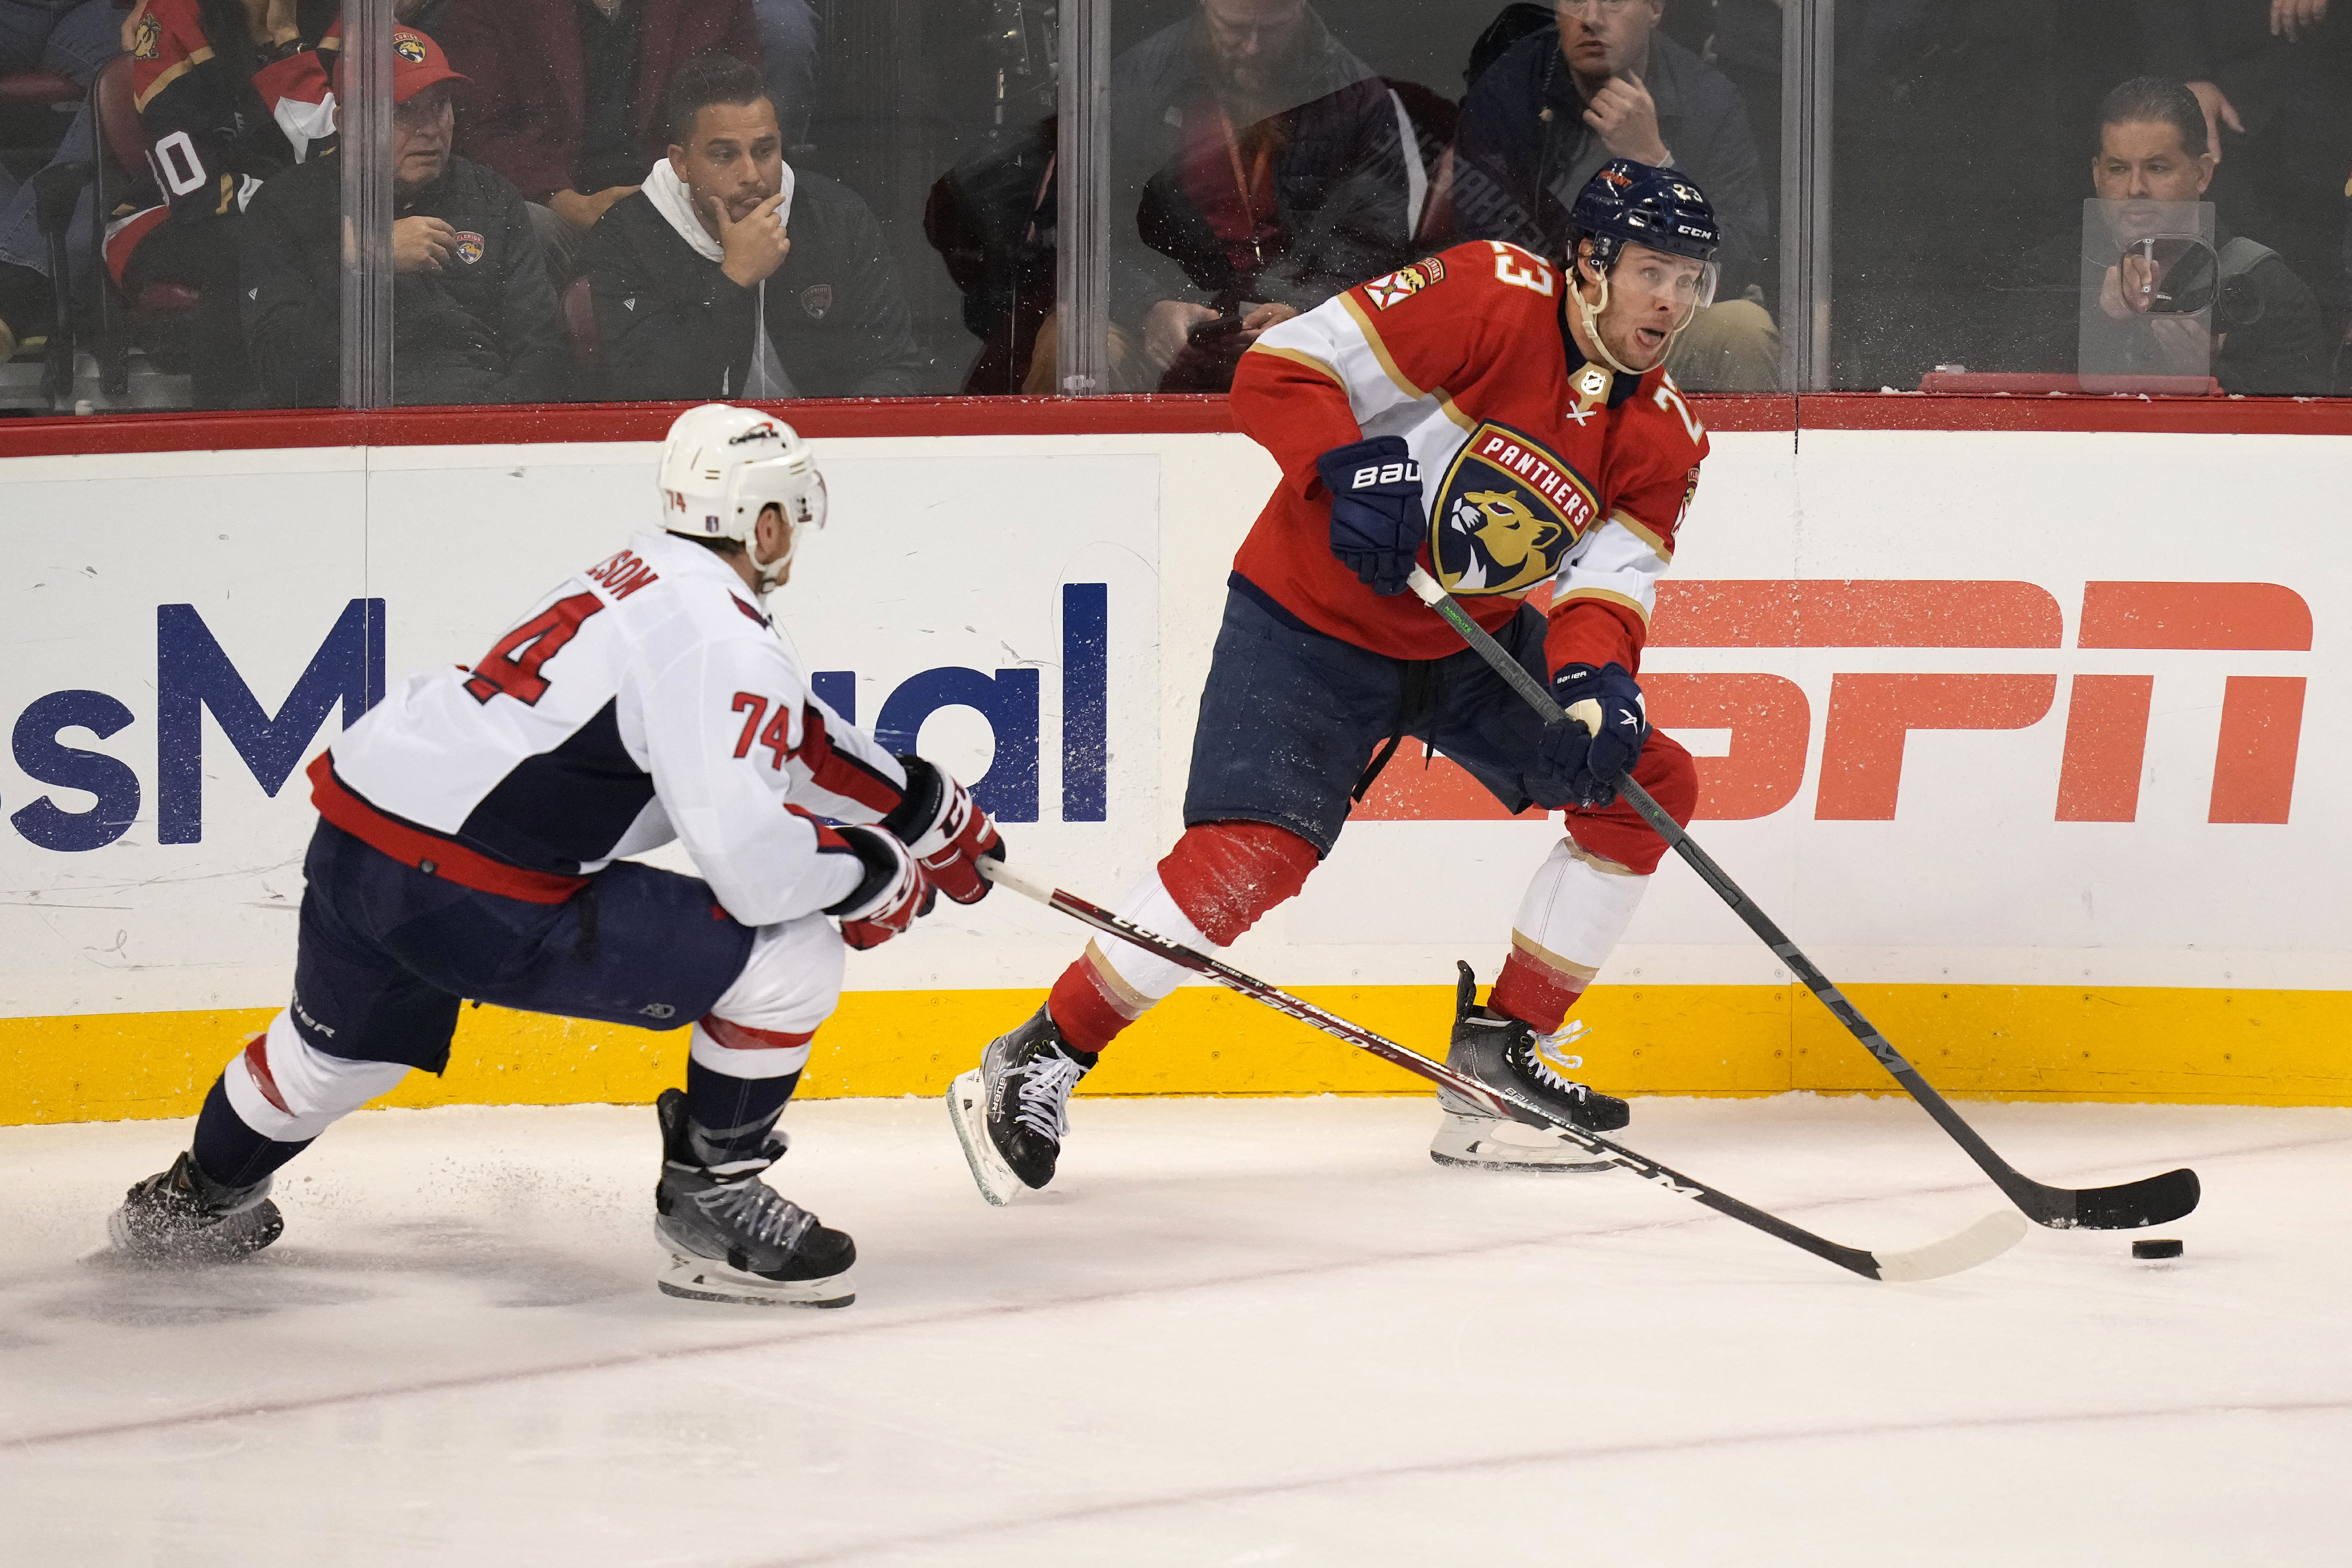 Carter Verhaeghe's OT goal lifts Panthers past Capitals